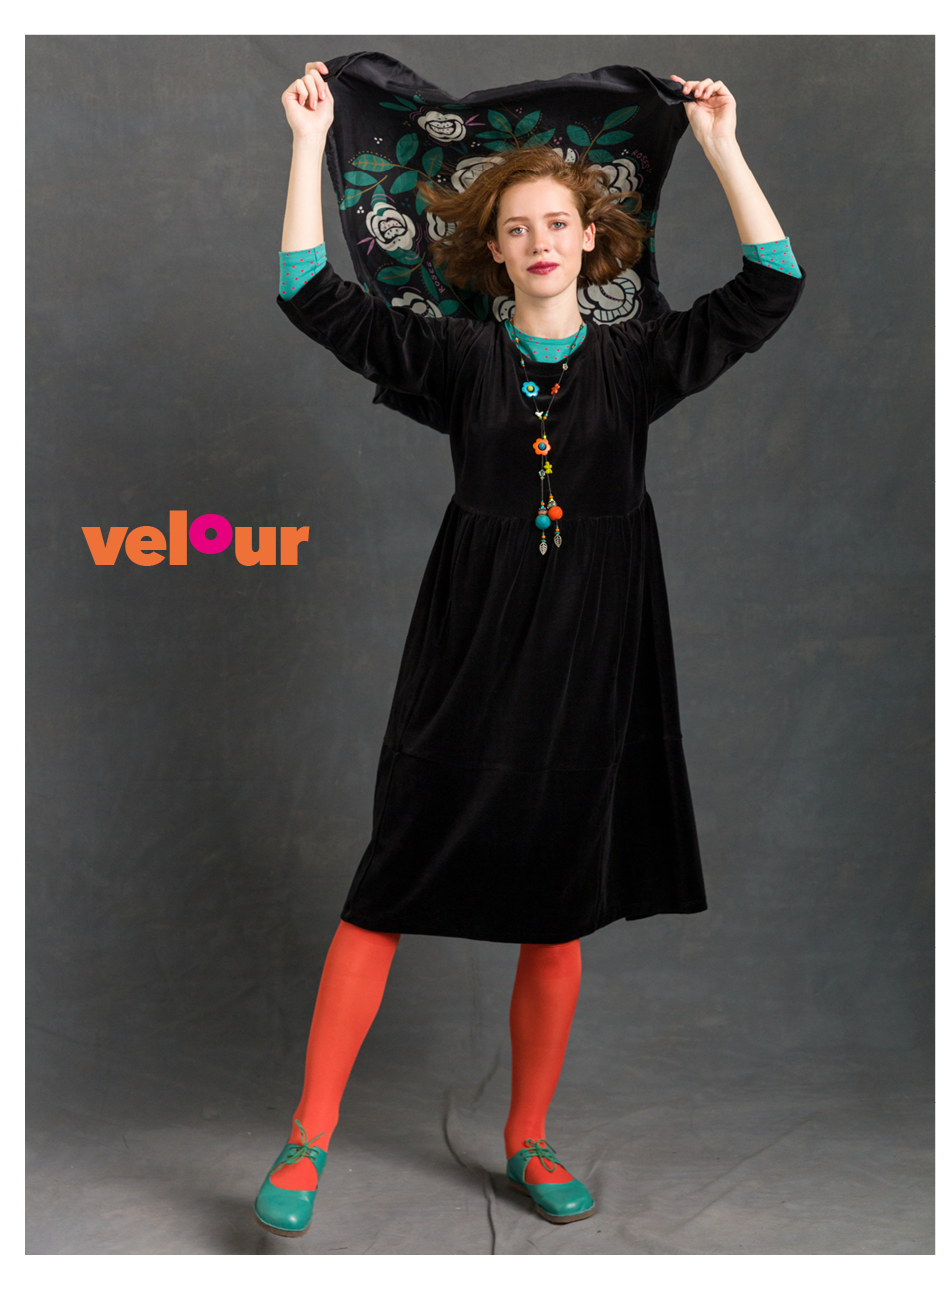 Velour dress in organic cotton/recycled polyester